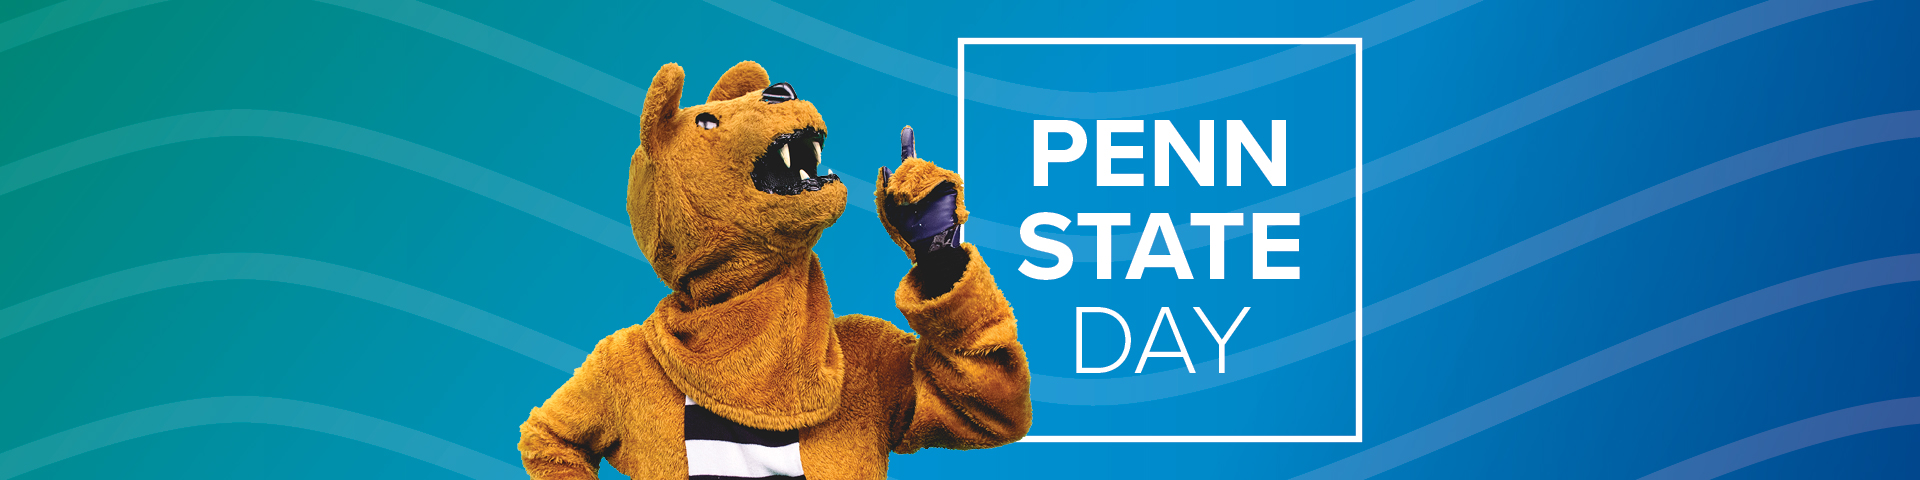 Mascot pointing up with text that reads "Penn State Day"